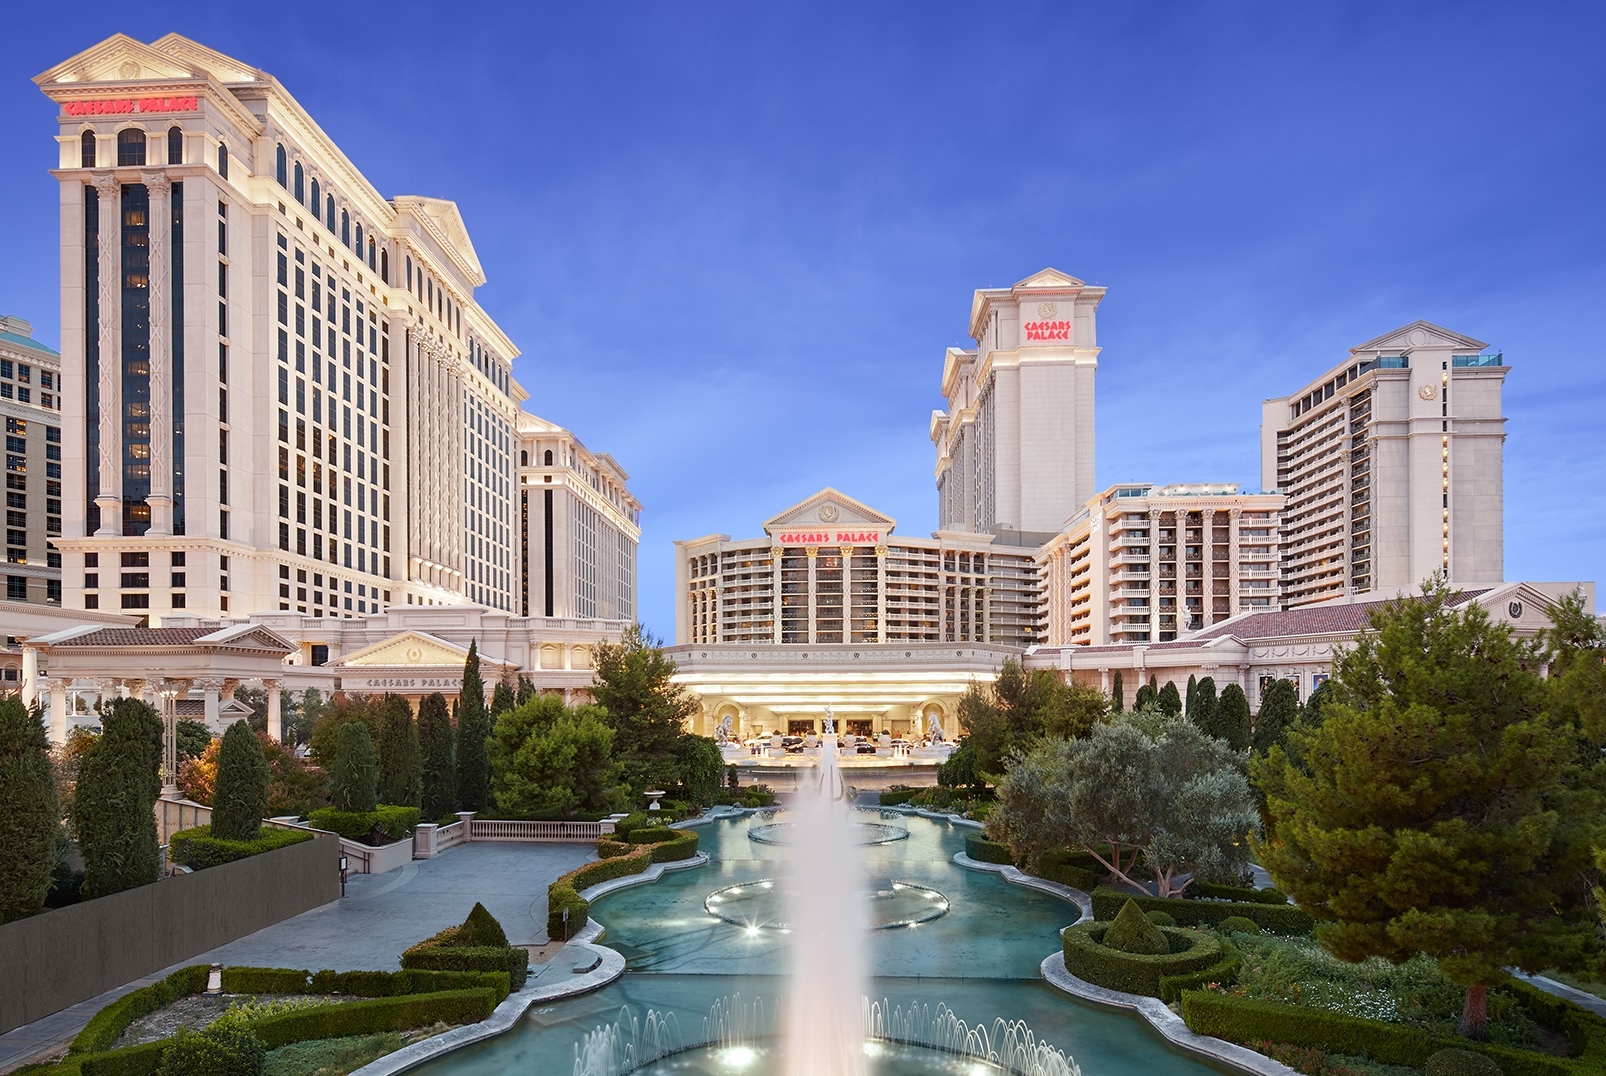 Preparing the palace: How an iconic Las Vegas casino plans to conquer  Covid-19